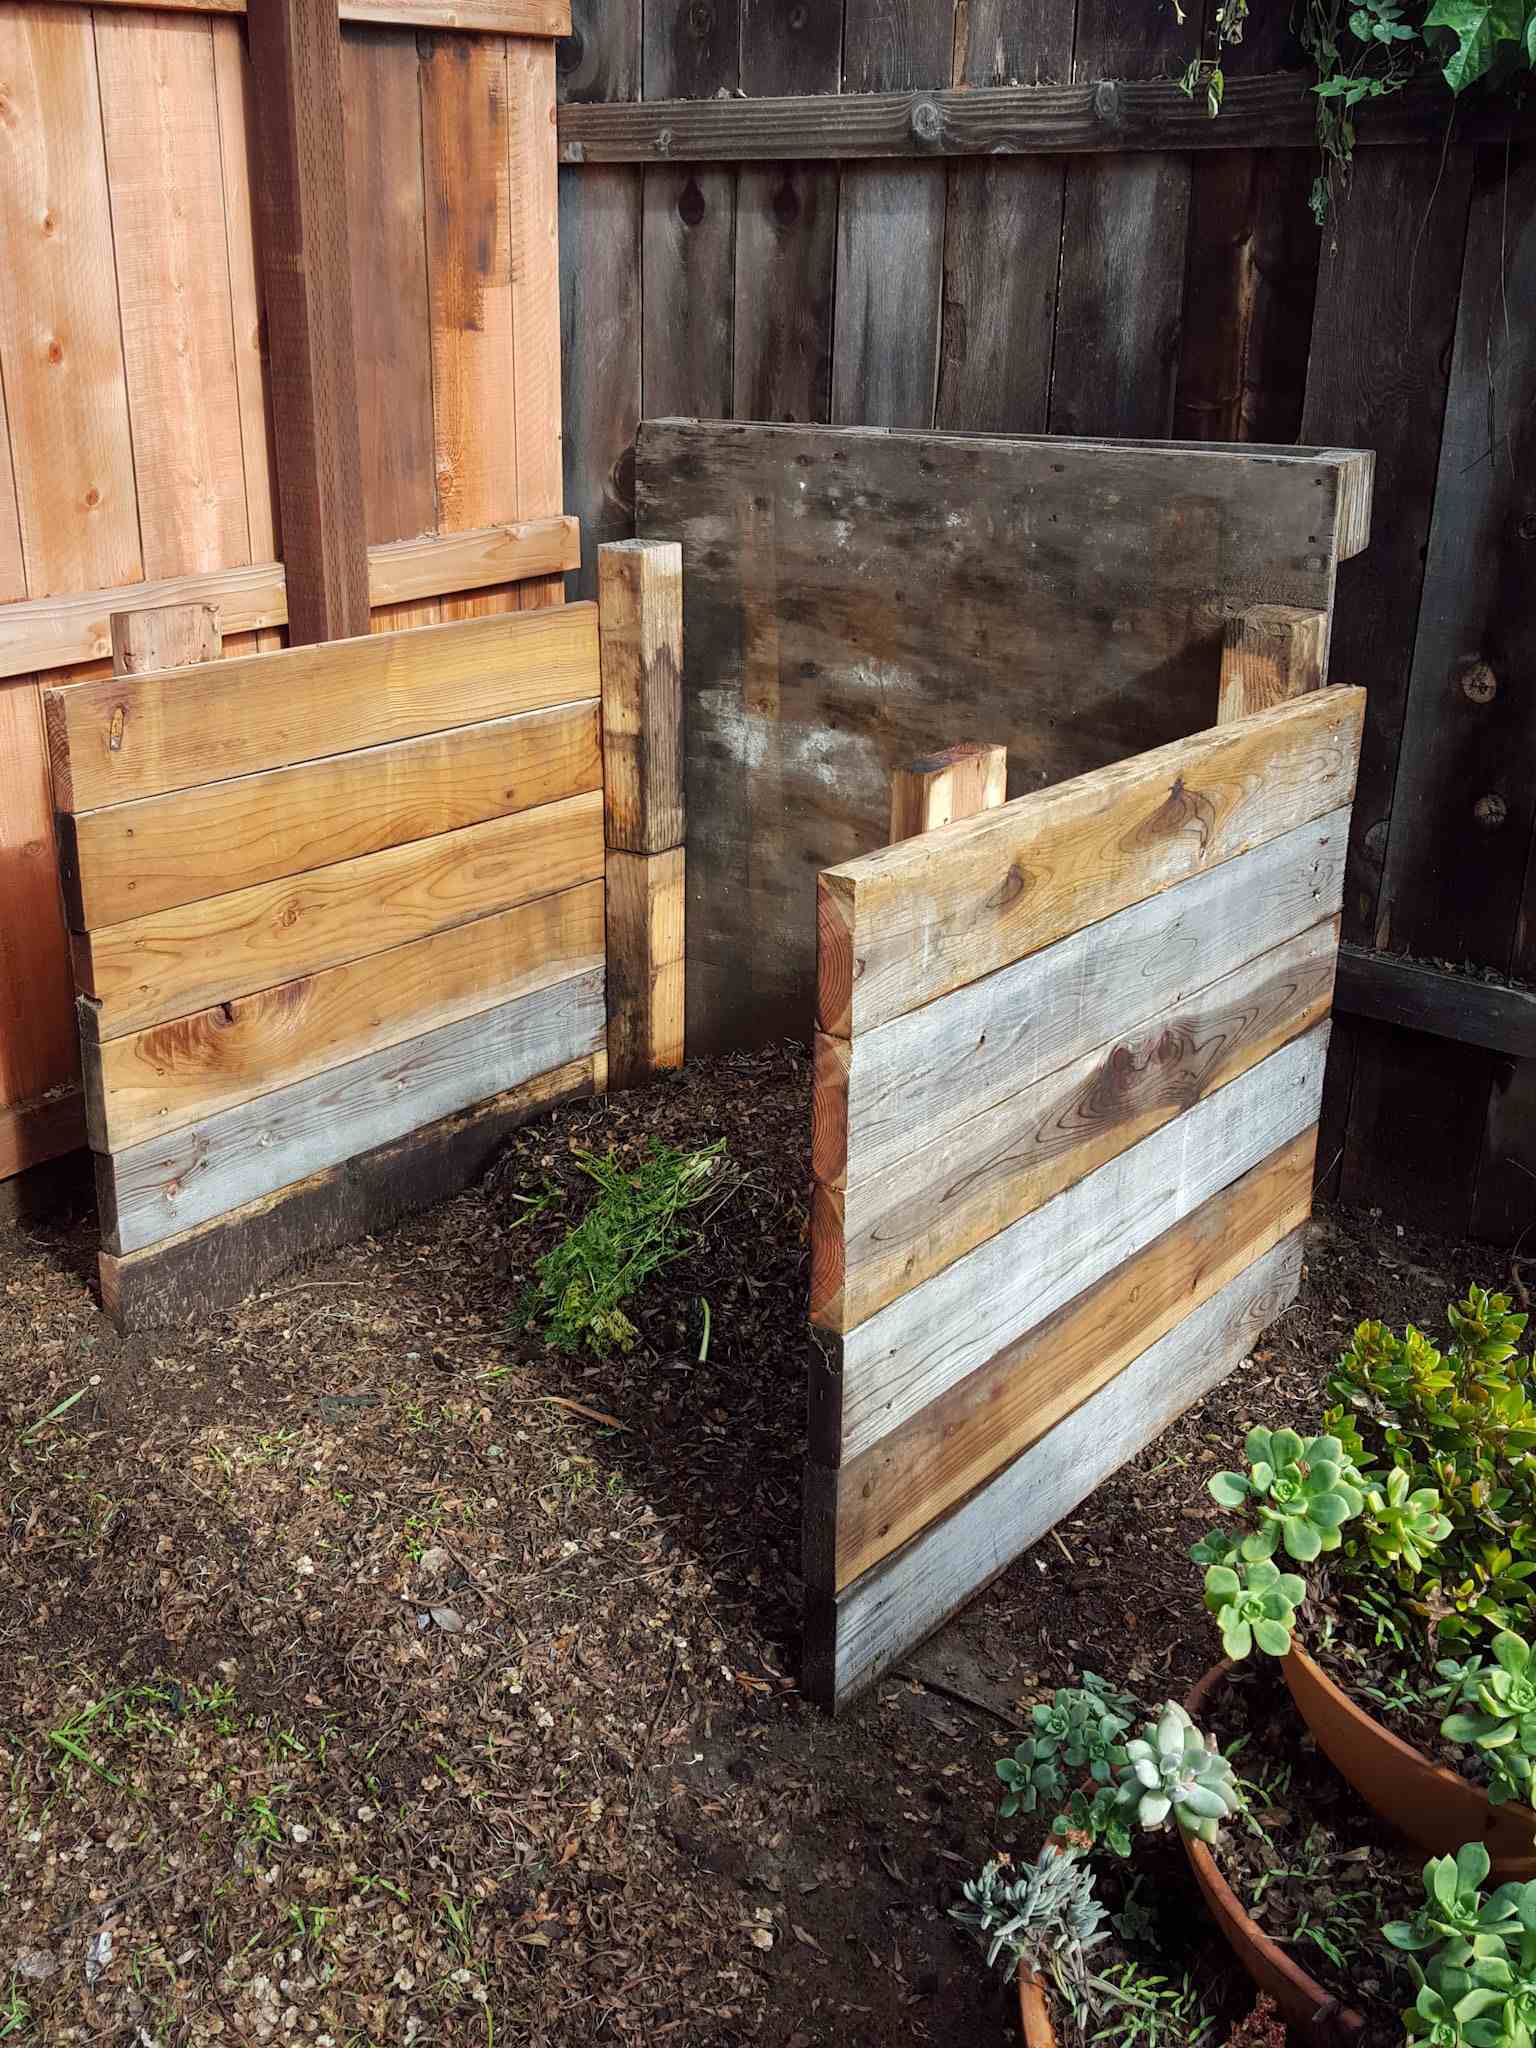 A three sided wooden single compartment compost bin is shown with a small amount of green and brown material in various stages of decomposition inside it. There is a three tiered pot nearby full of succulents. 